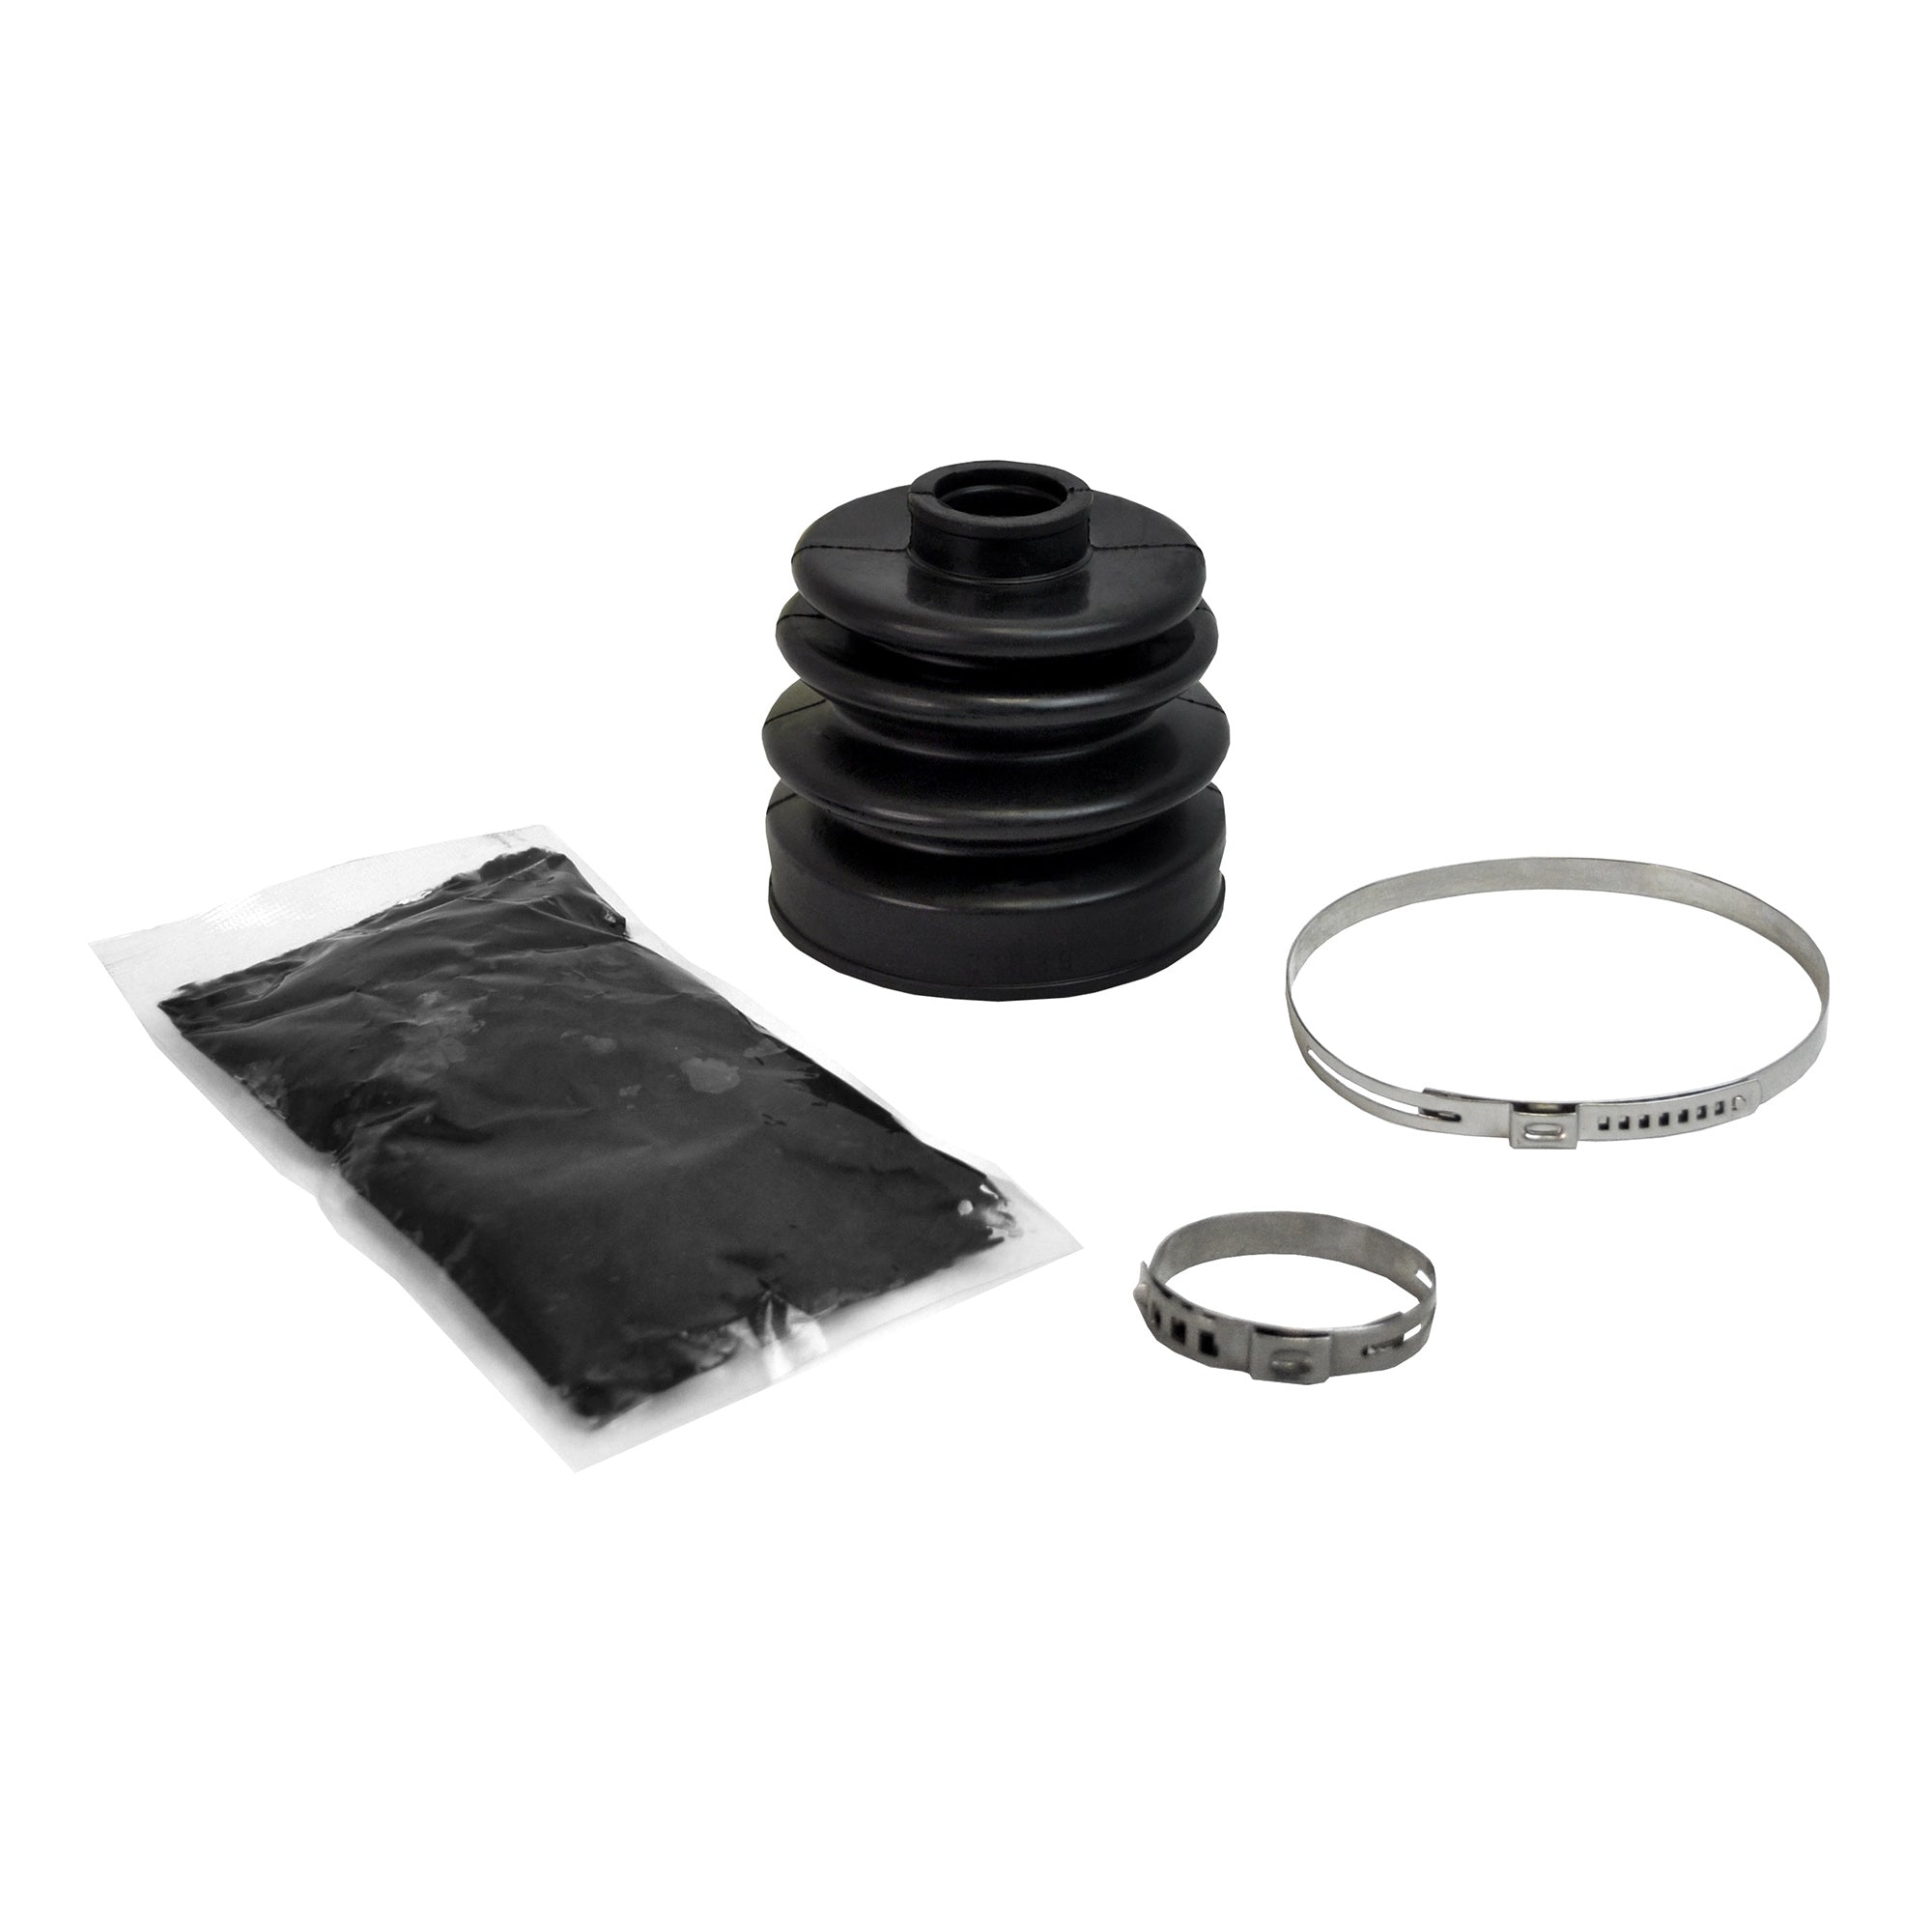 Polaris Worker 500 Rugged OE Replacement Boot Kit